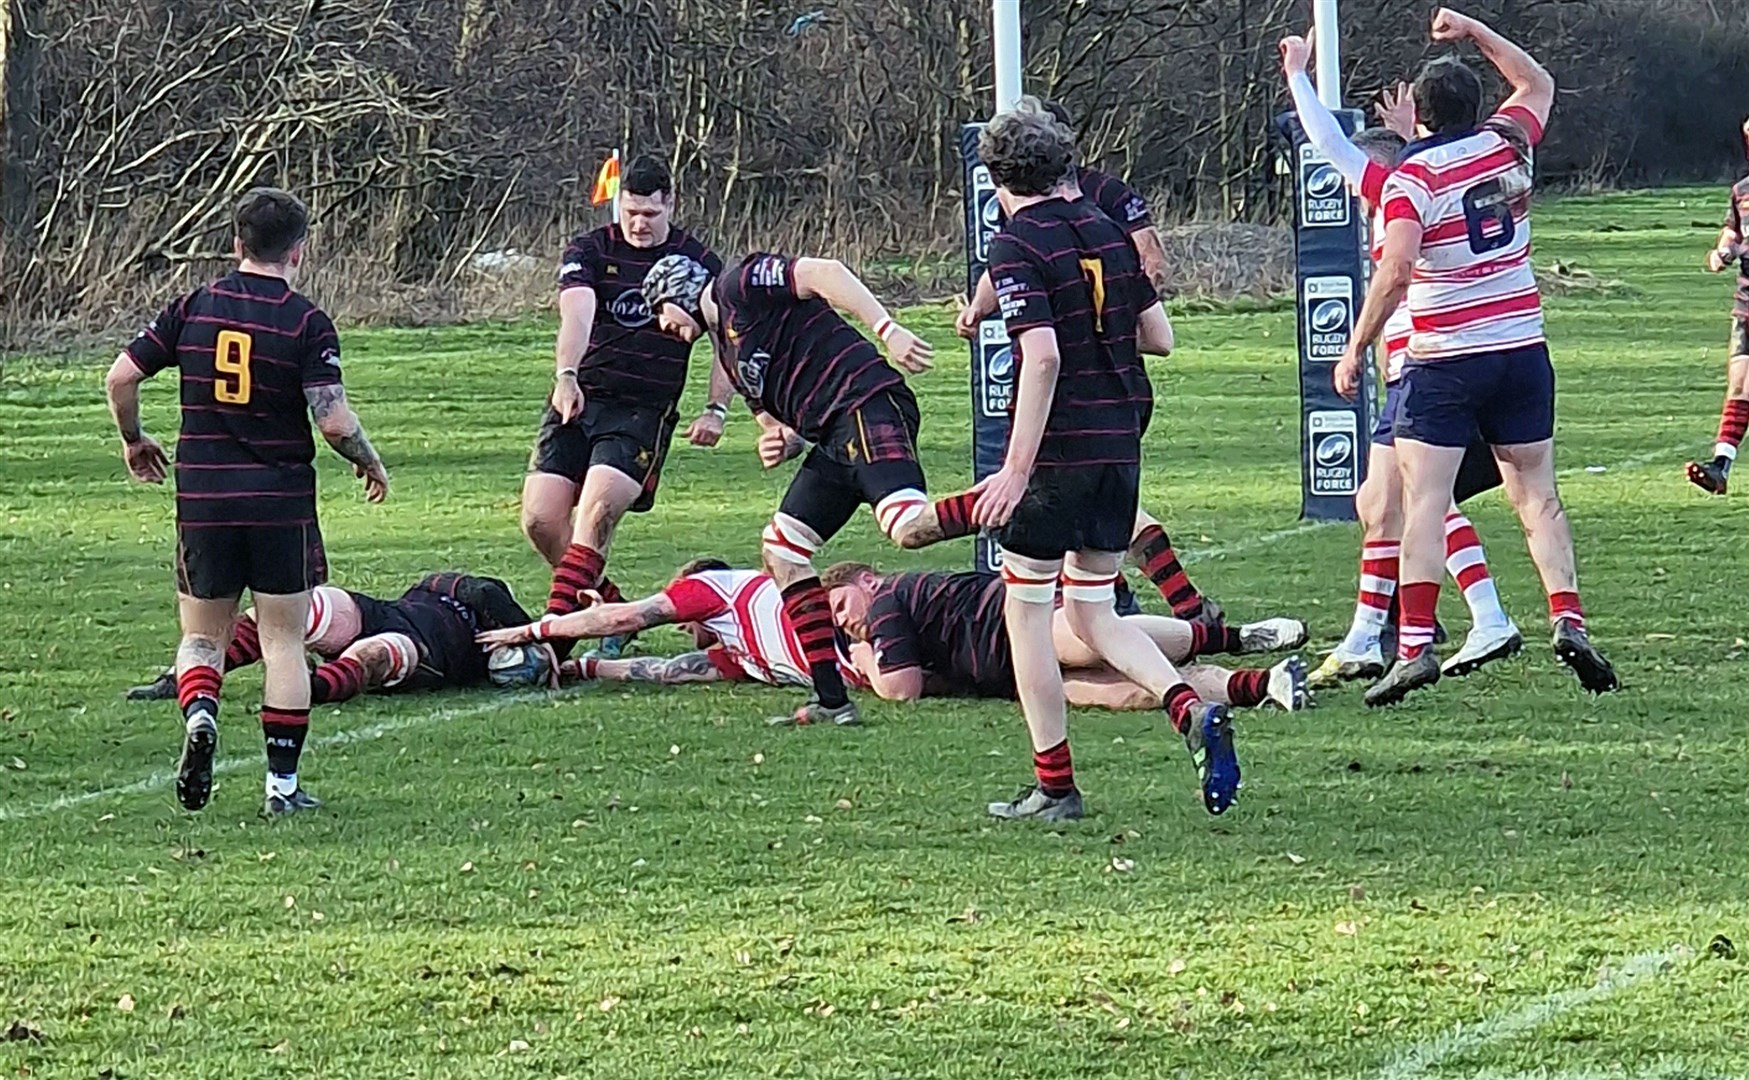 Hugh MacRae reaches out to score. Picture: Grant Mitchell